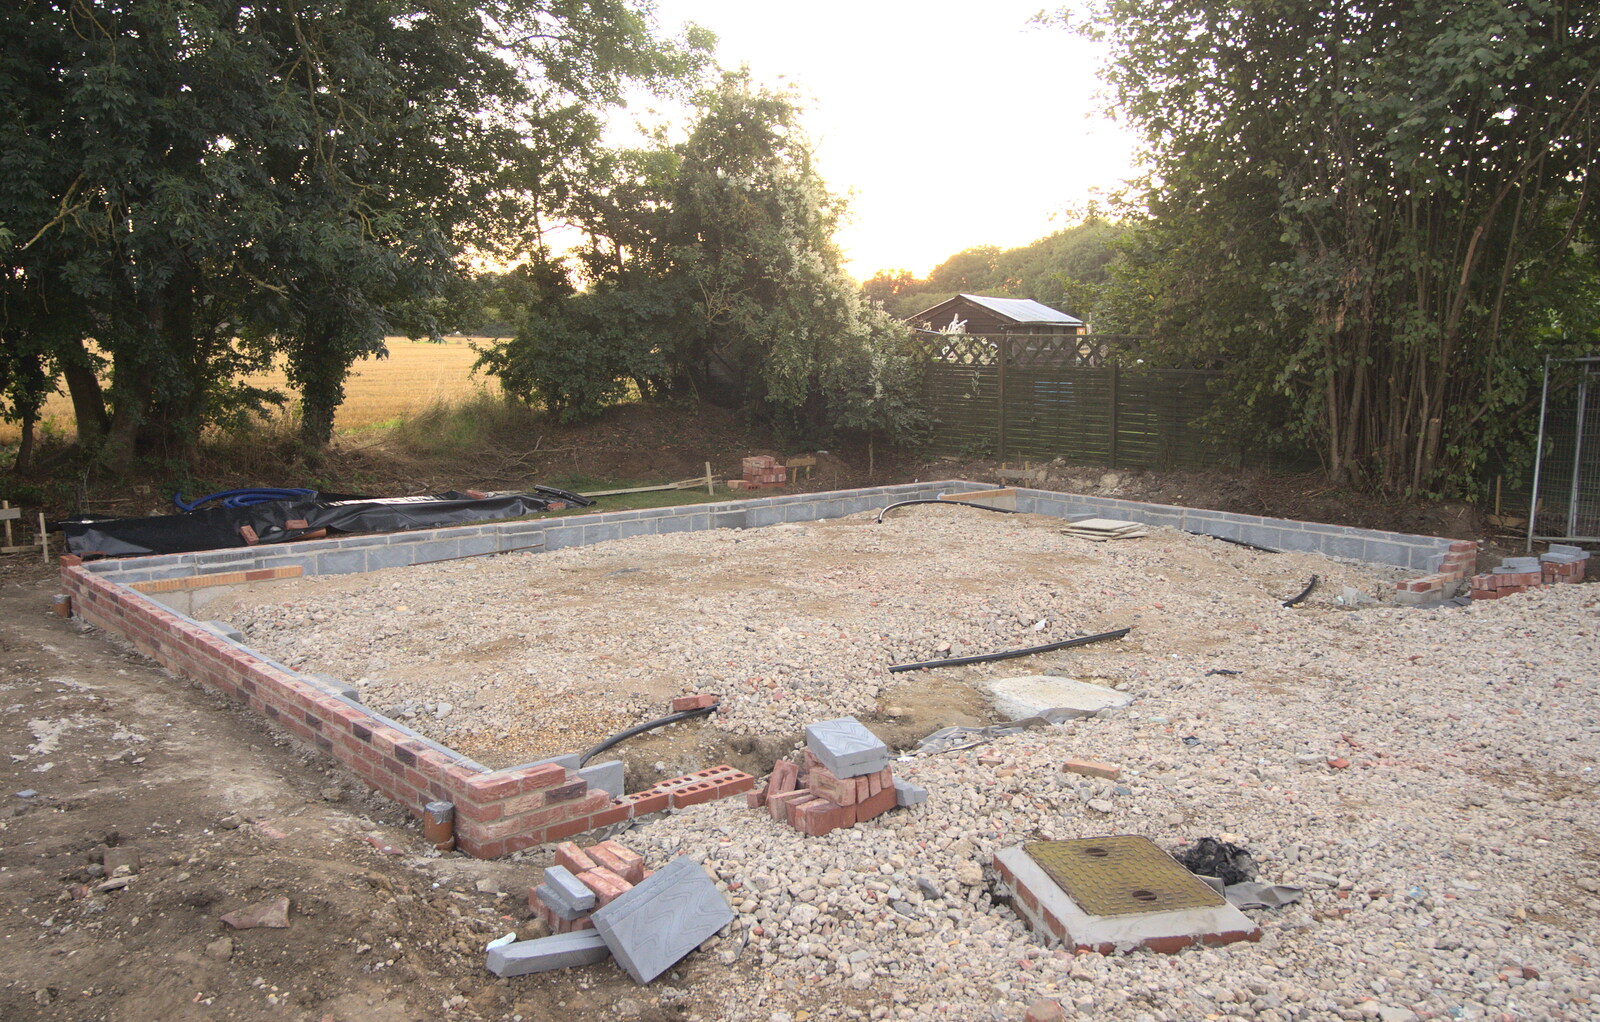 The start of the garage wall from Bressingham Gardens, and Building Progress, Brome, Suffolk - 26th August 2013